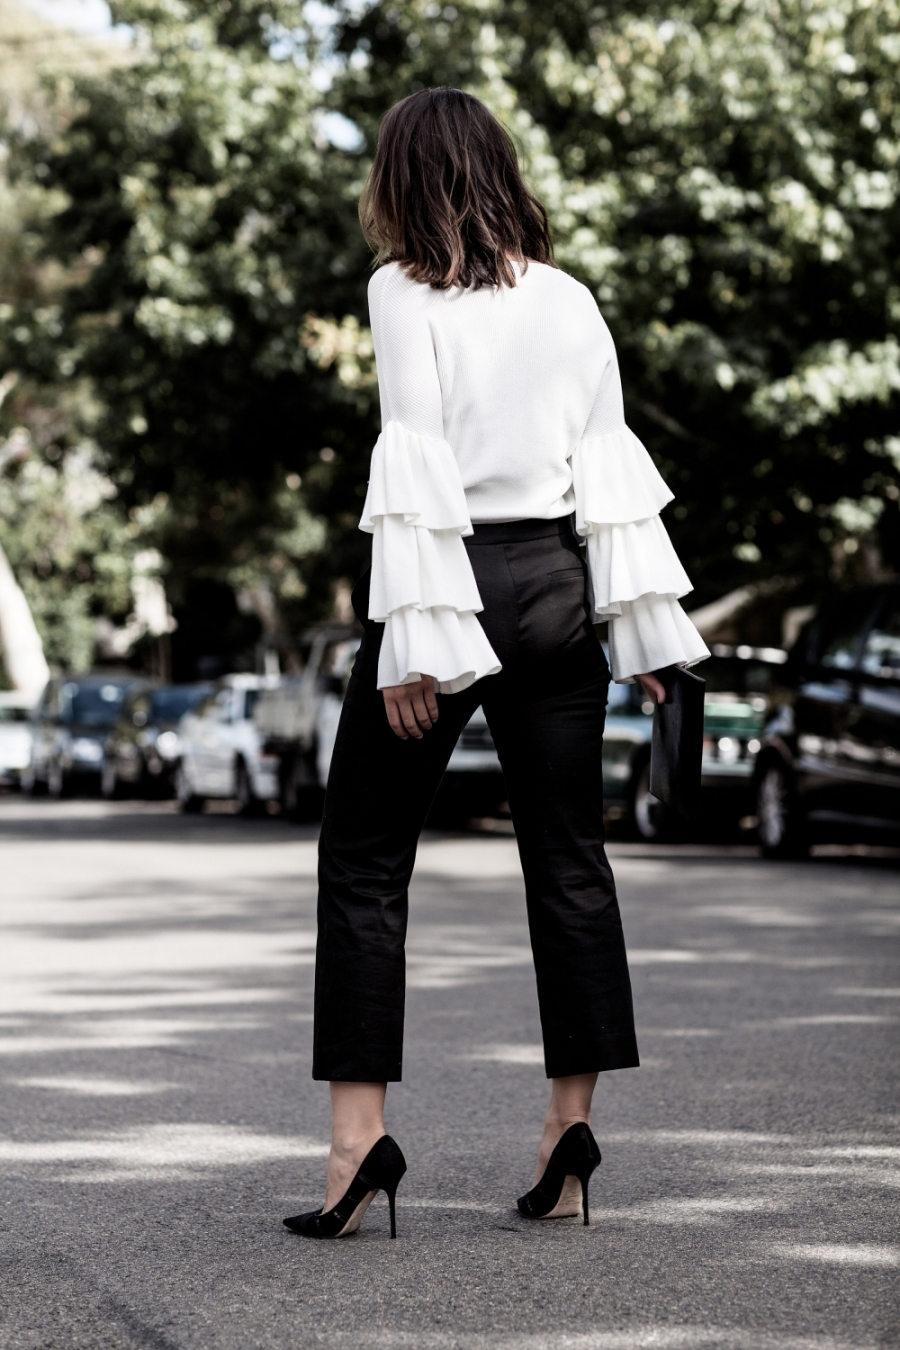 harper-and-harley_ruffle-white-top-sleeves_cropped-pants_style_outfit_3-mmvyse4emibxyq4fzsqsjaj8821ks4wdt3twr68530